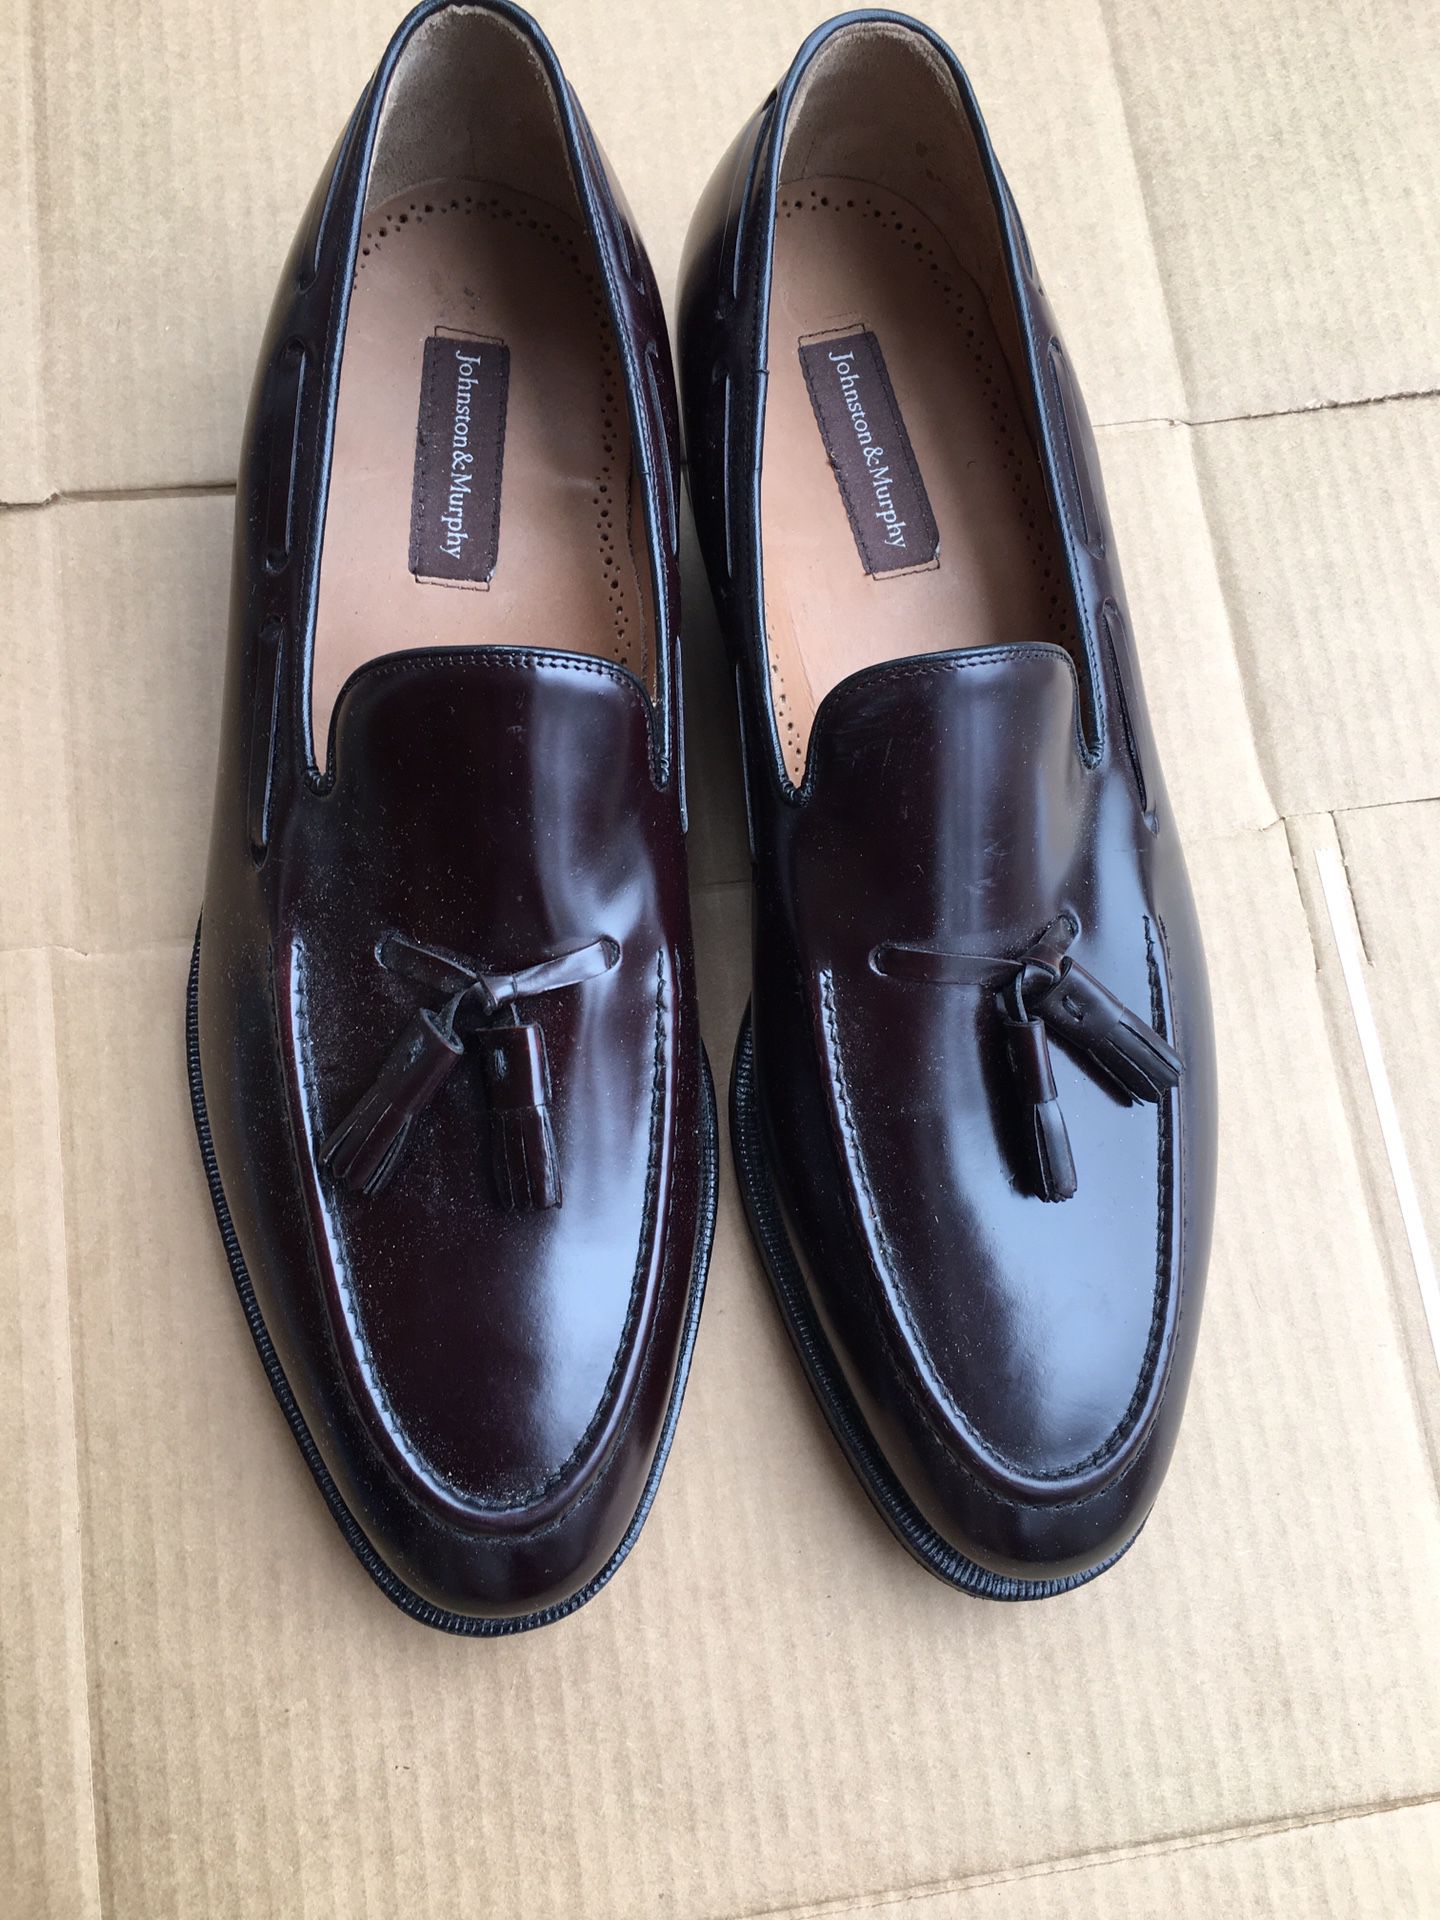 New Johnson & Murphy’s cordovan leather loafers sz 13